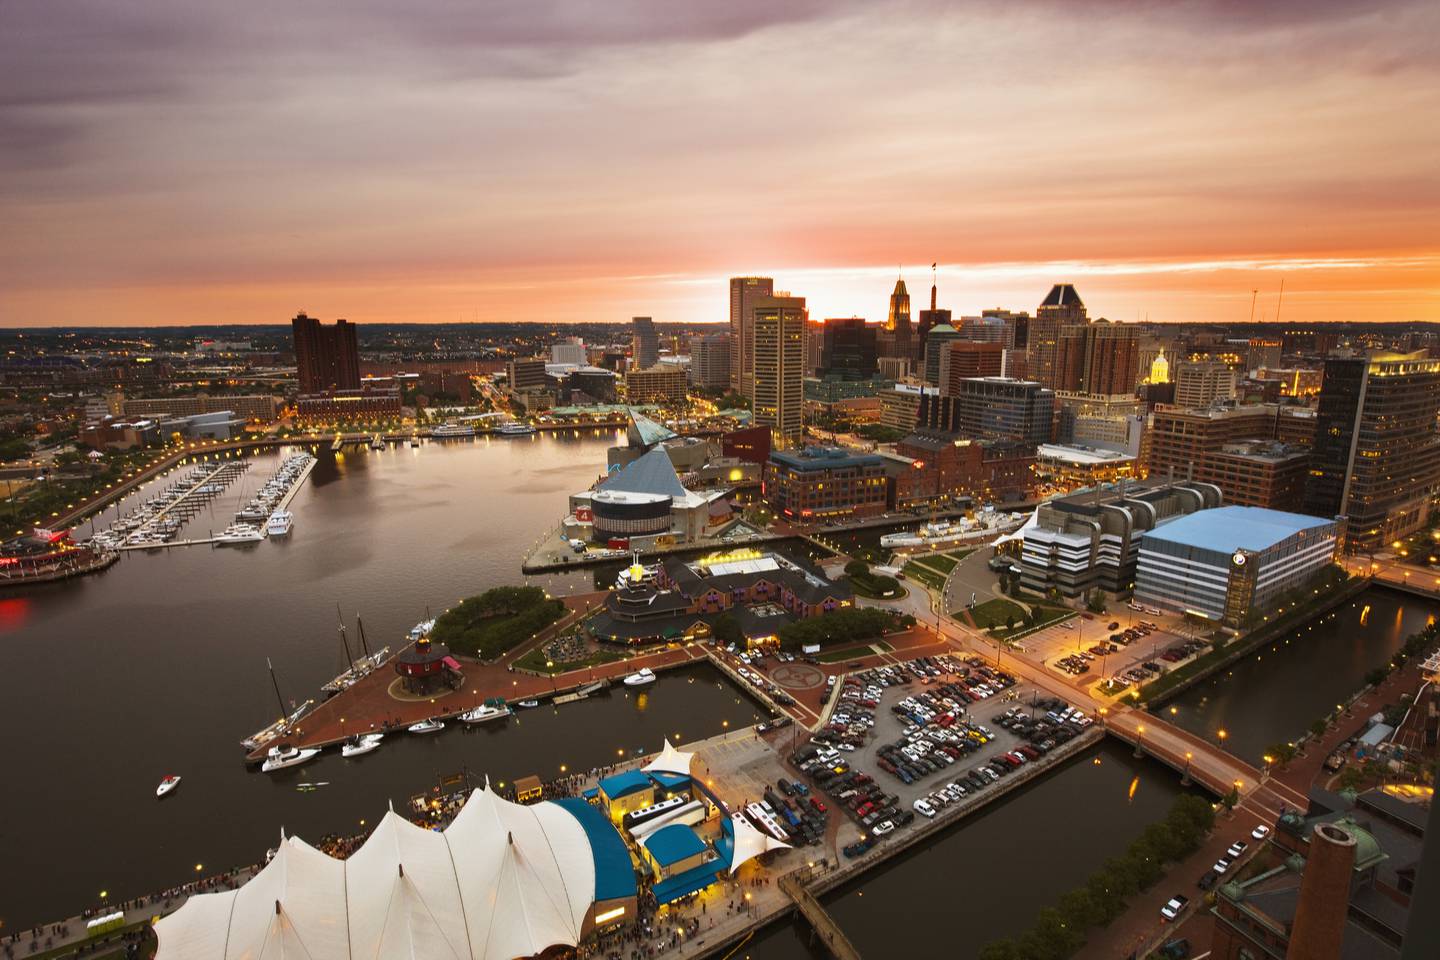 File photo of the Inner Harbor and downtown Baltimore as seen from the Baltimore Marriott Waterfront hotel.